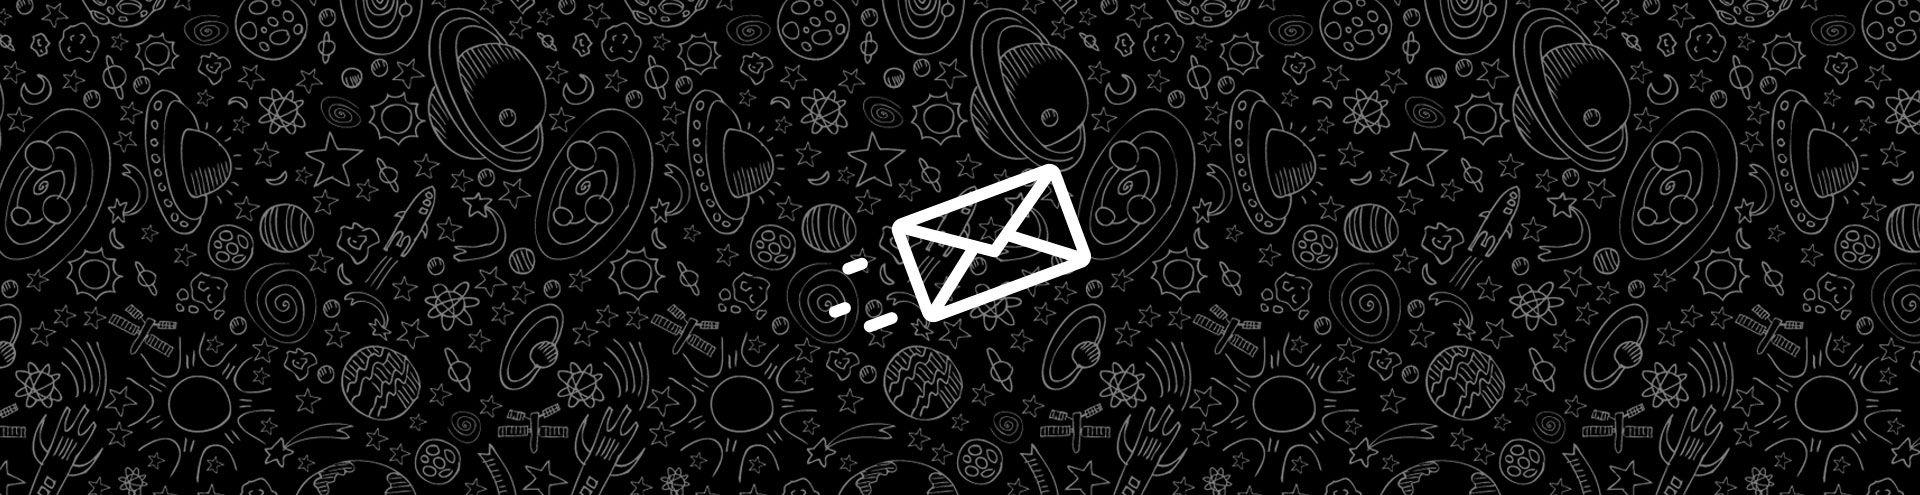 Email Sending Using MeteorJS: Implementation Process and Email Templates